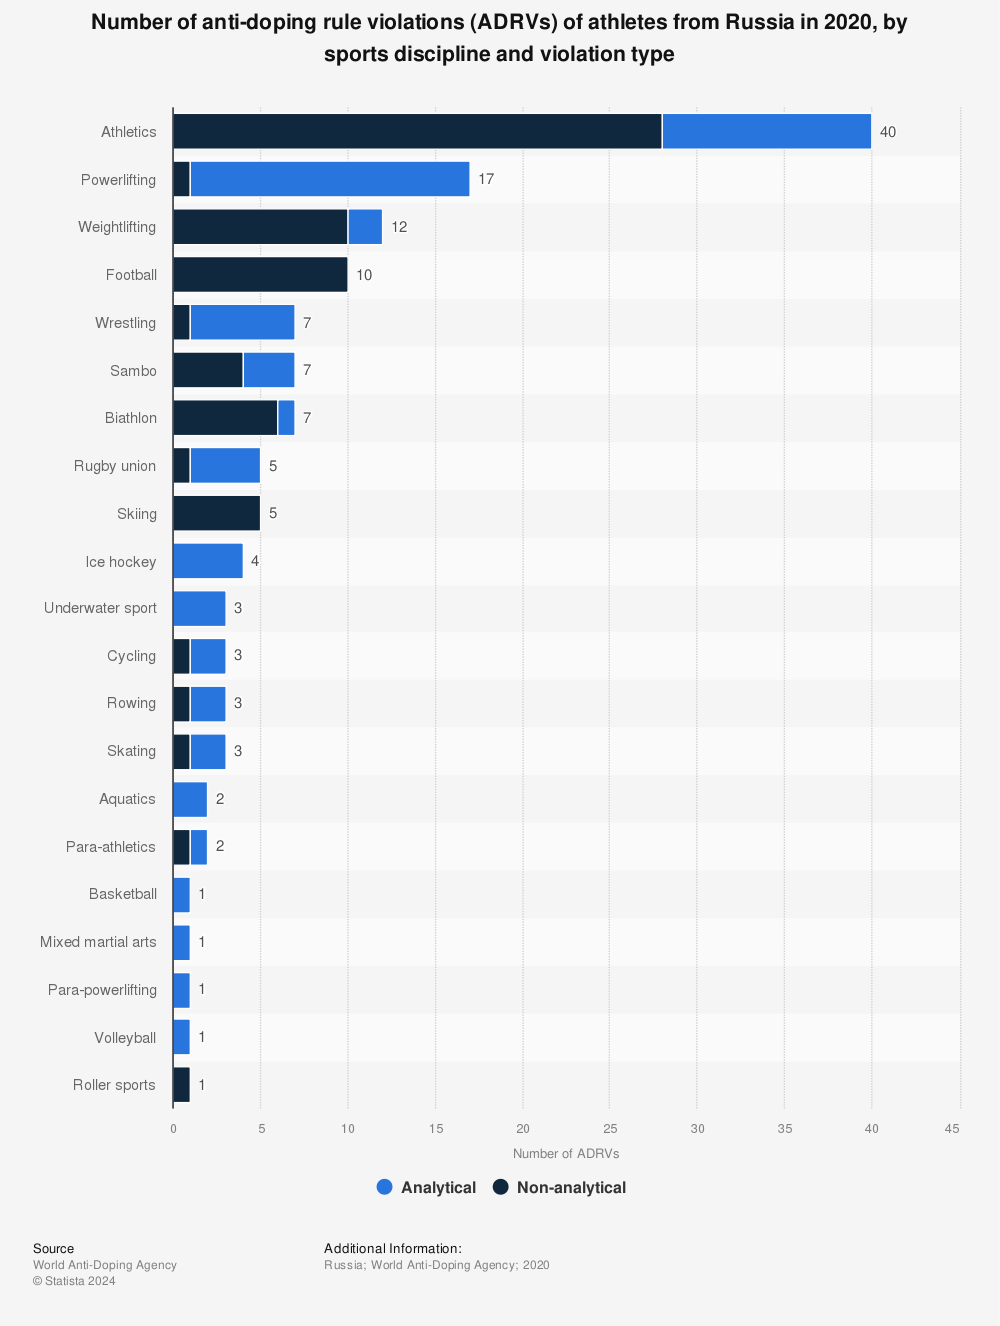 Statistic: Number of anti-doping rule violations (ADRVs) of athletes from Russia in 2019, by sports discipline and violation type | Statista